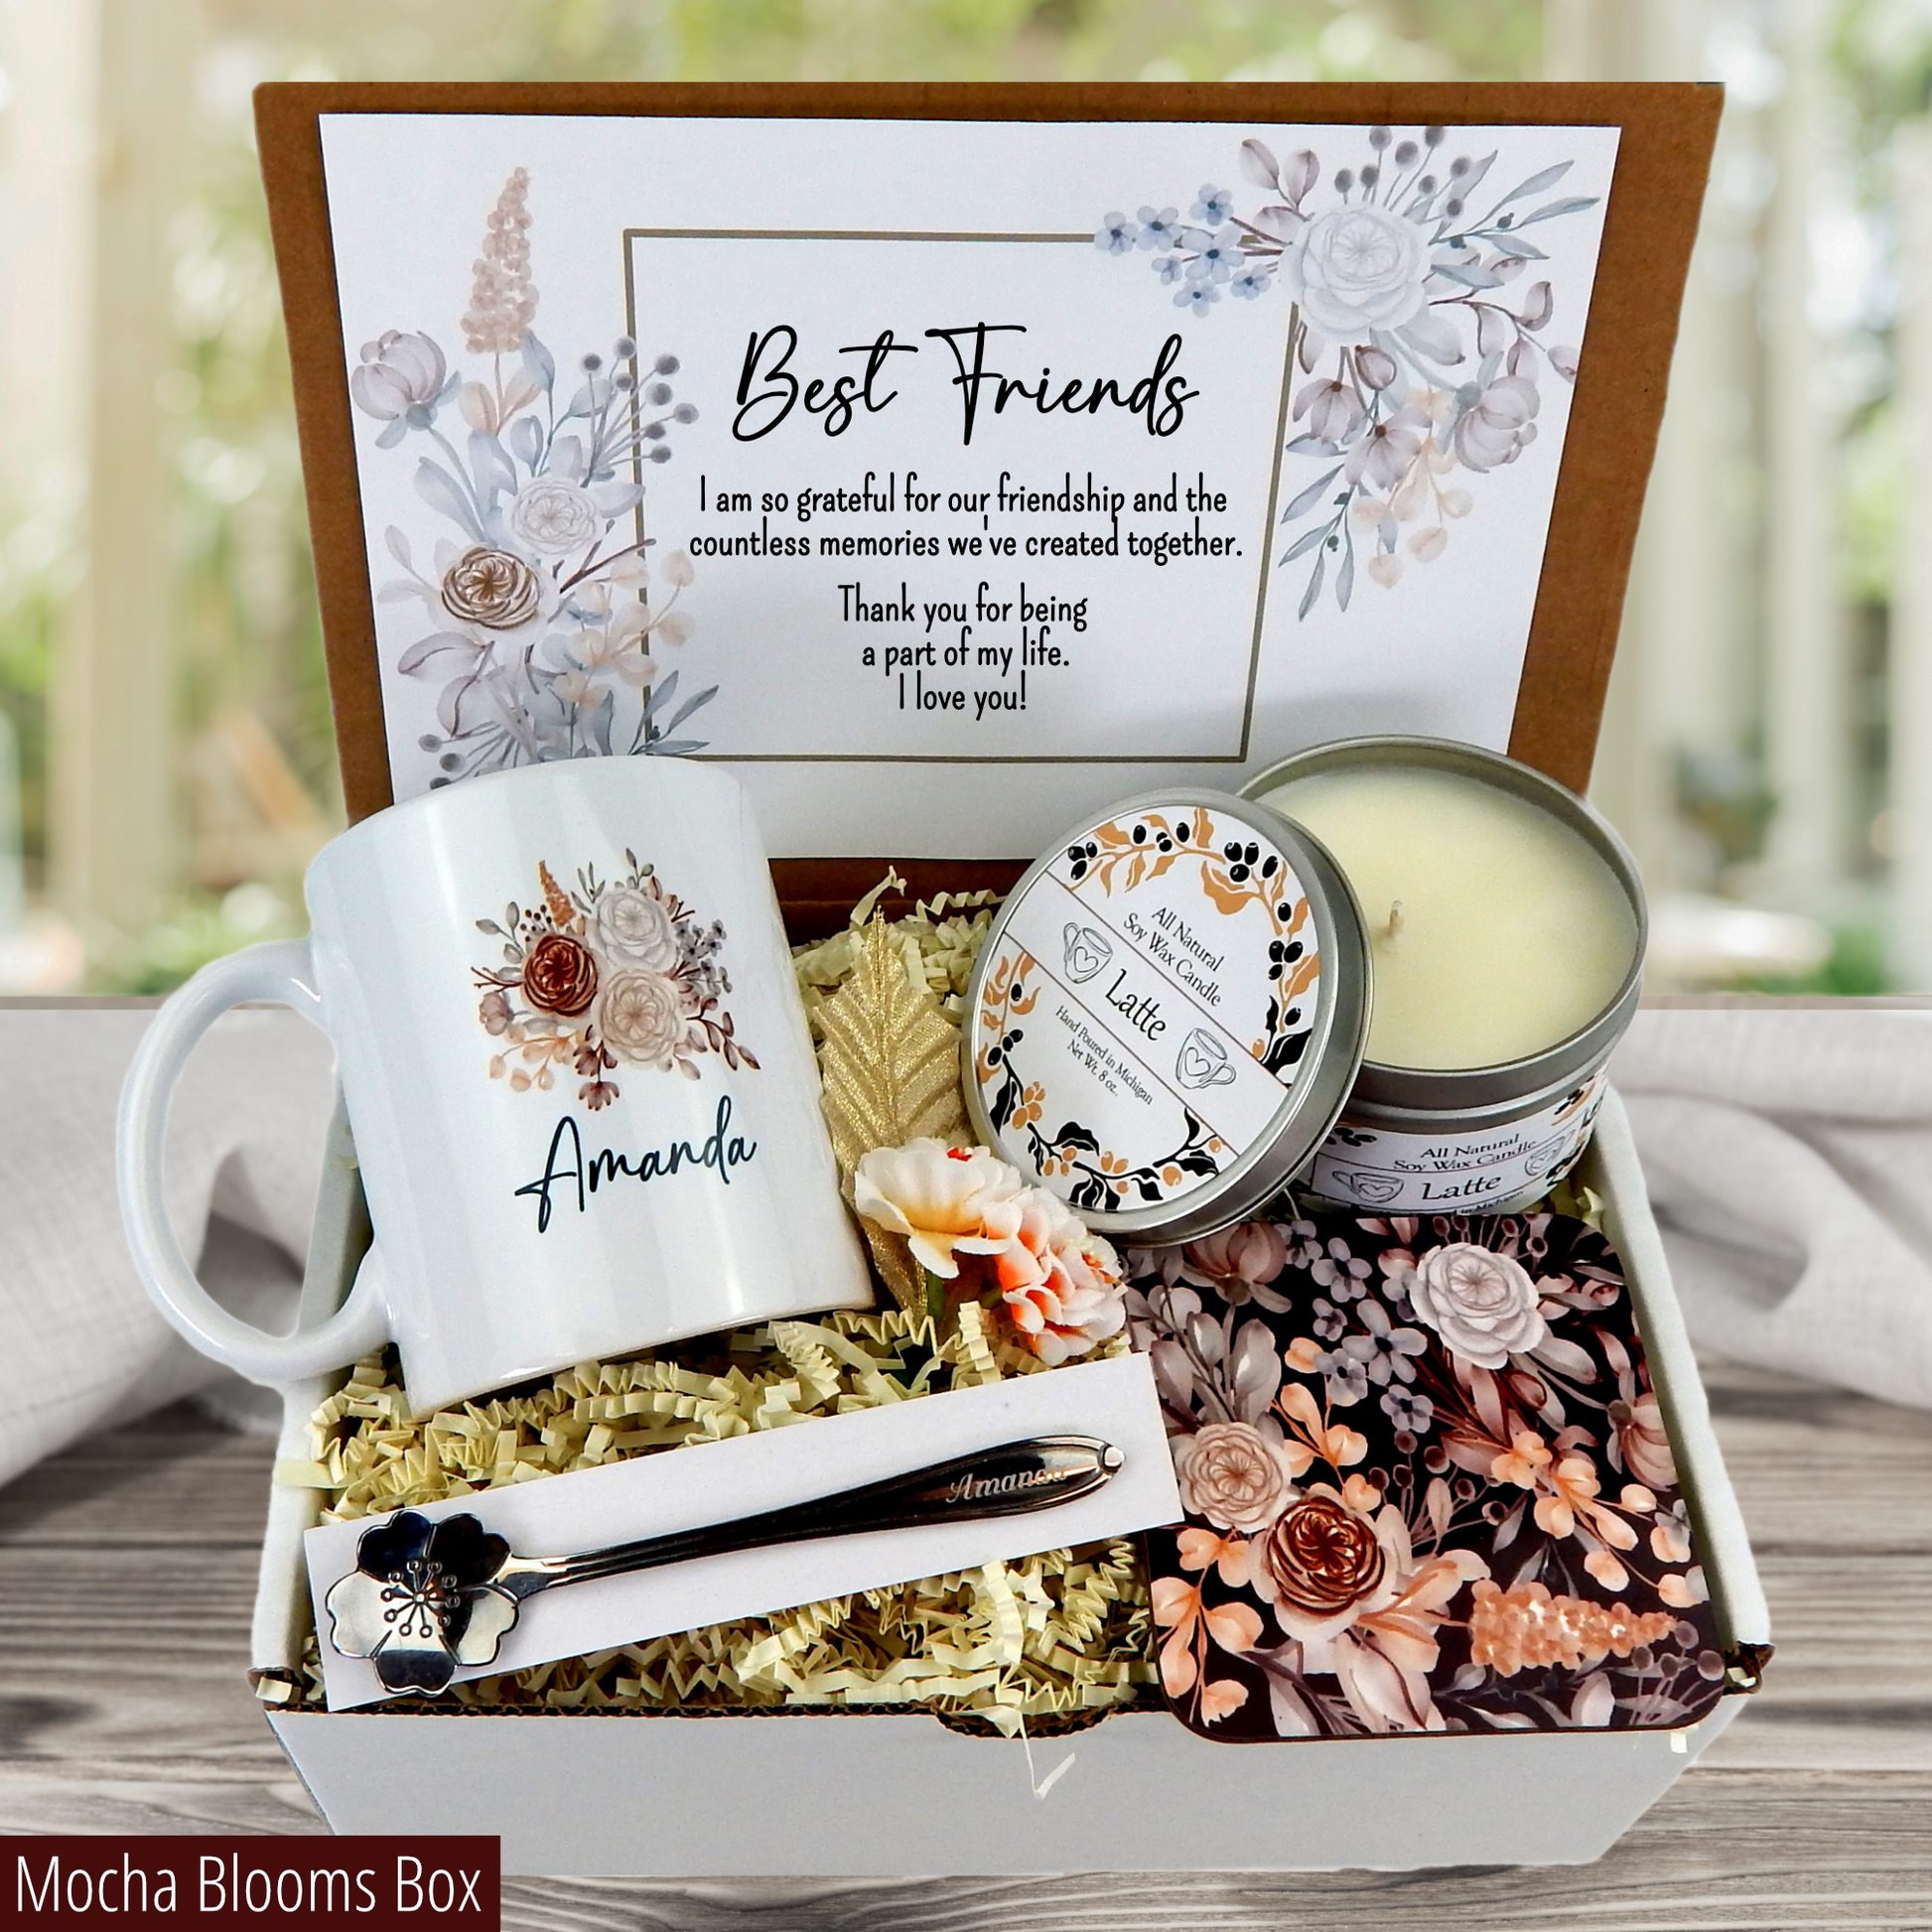 Gift for Best Friend - Friendship Gift - Care Package for Friend